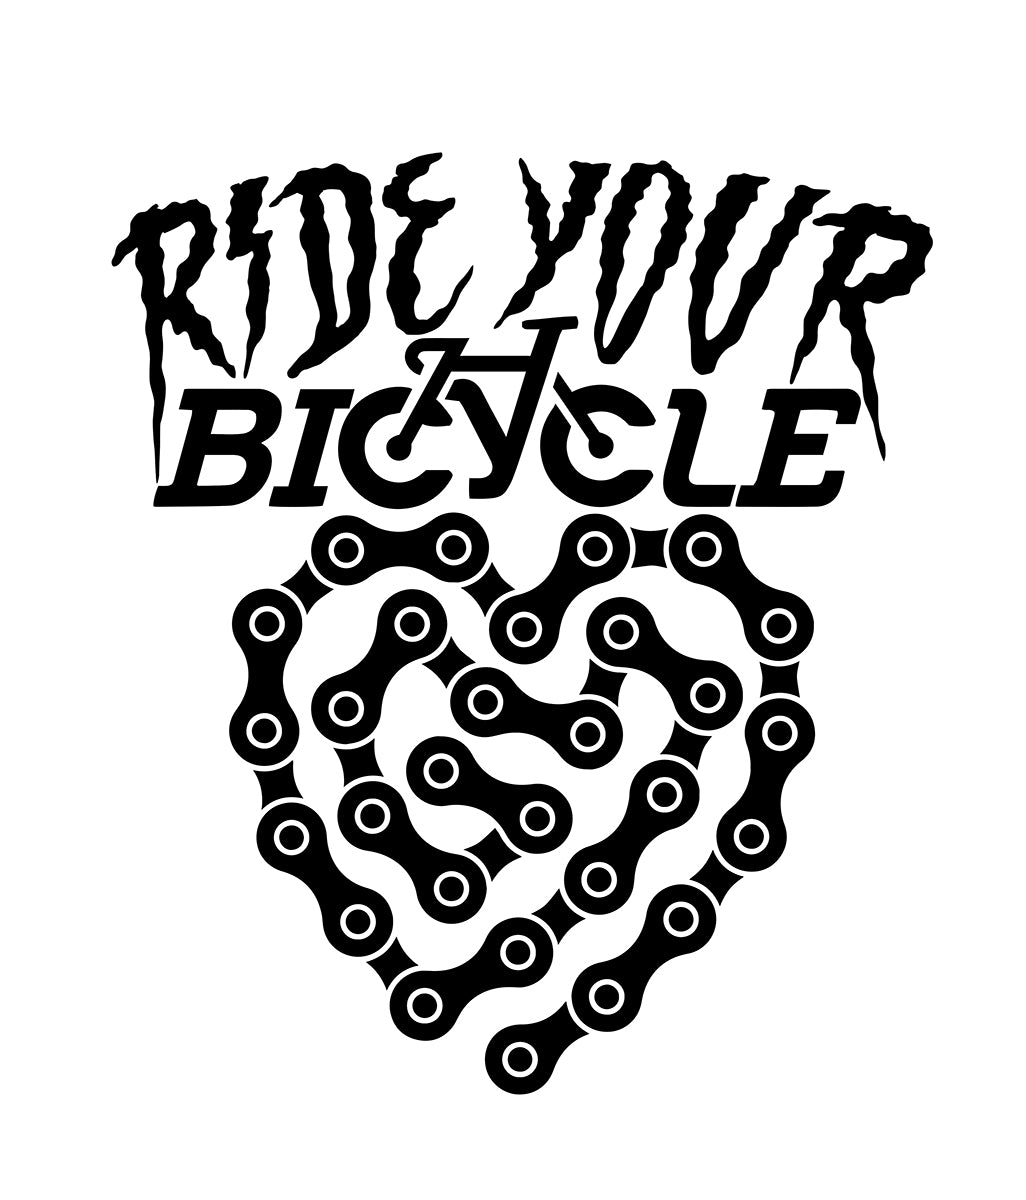 "Ride Your Bicycle" 13 x 19 Poster Print